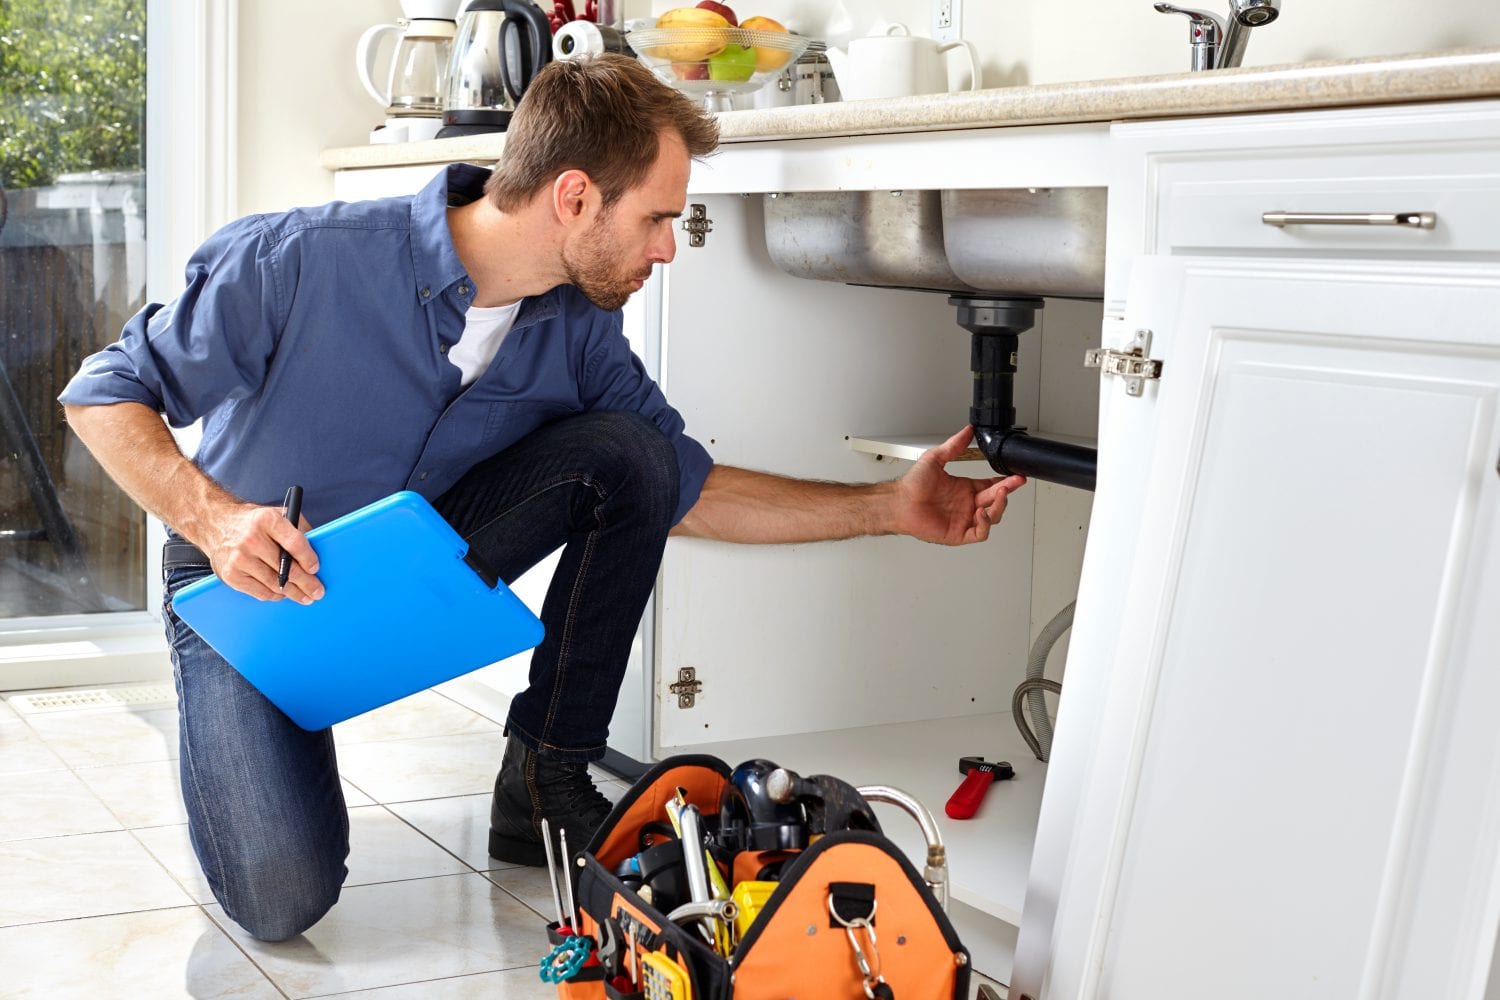 A plumber is kneeling down in a kitchen looking under a sink.